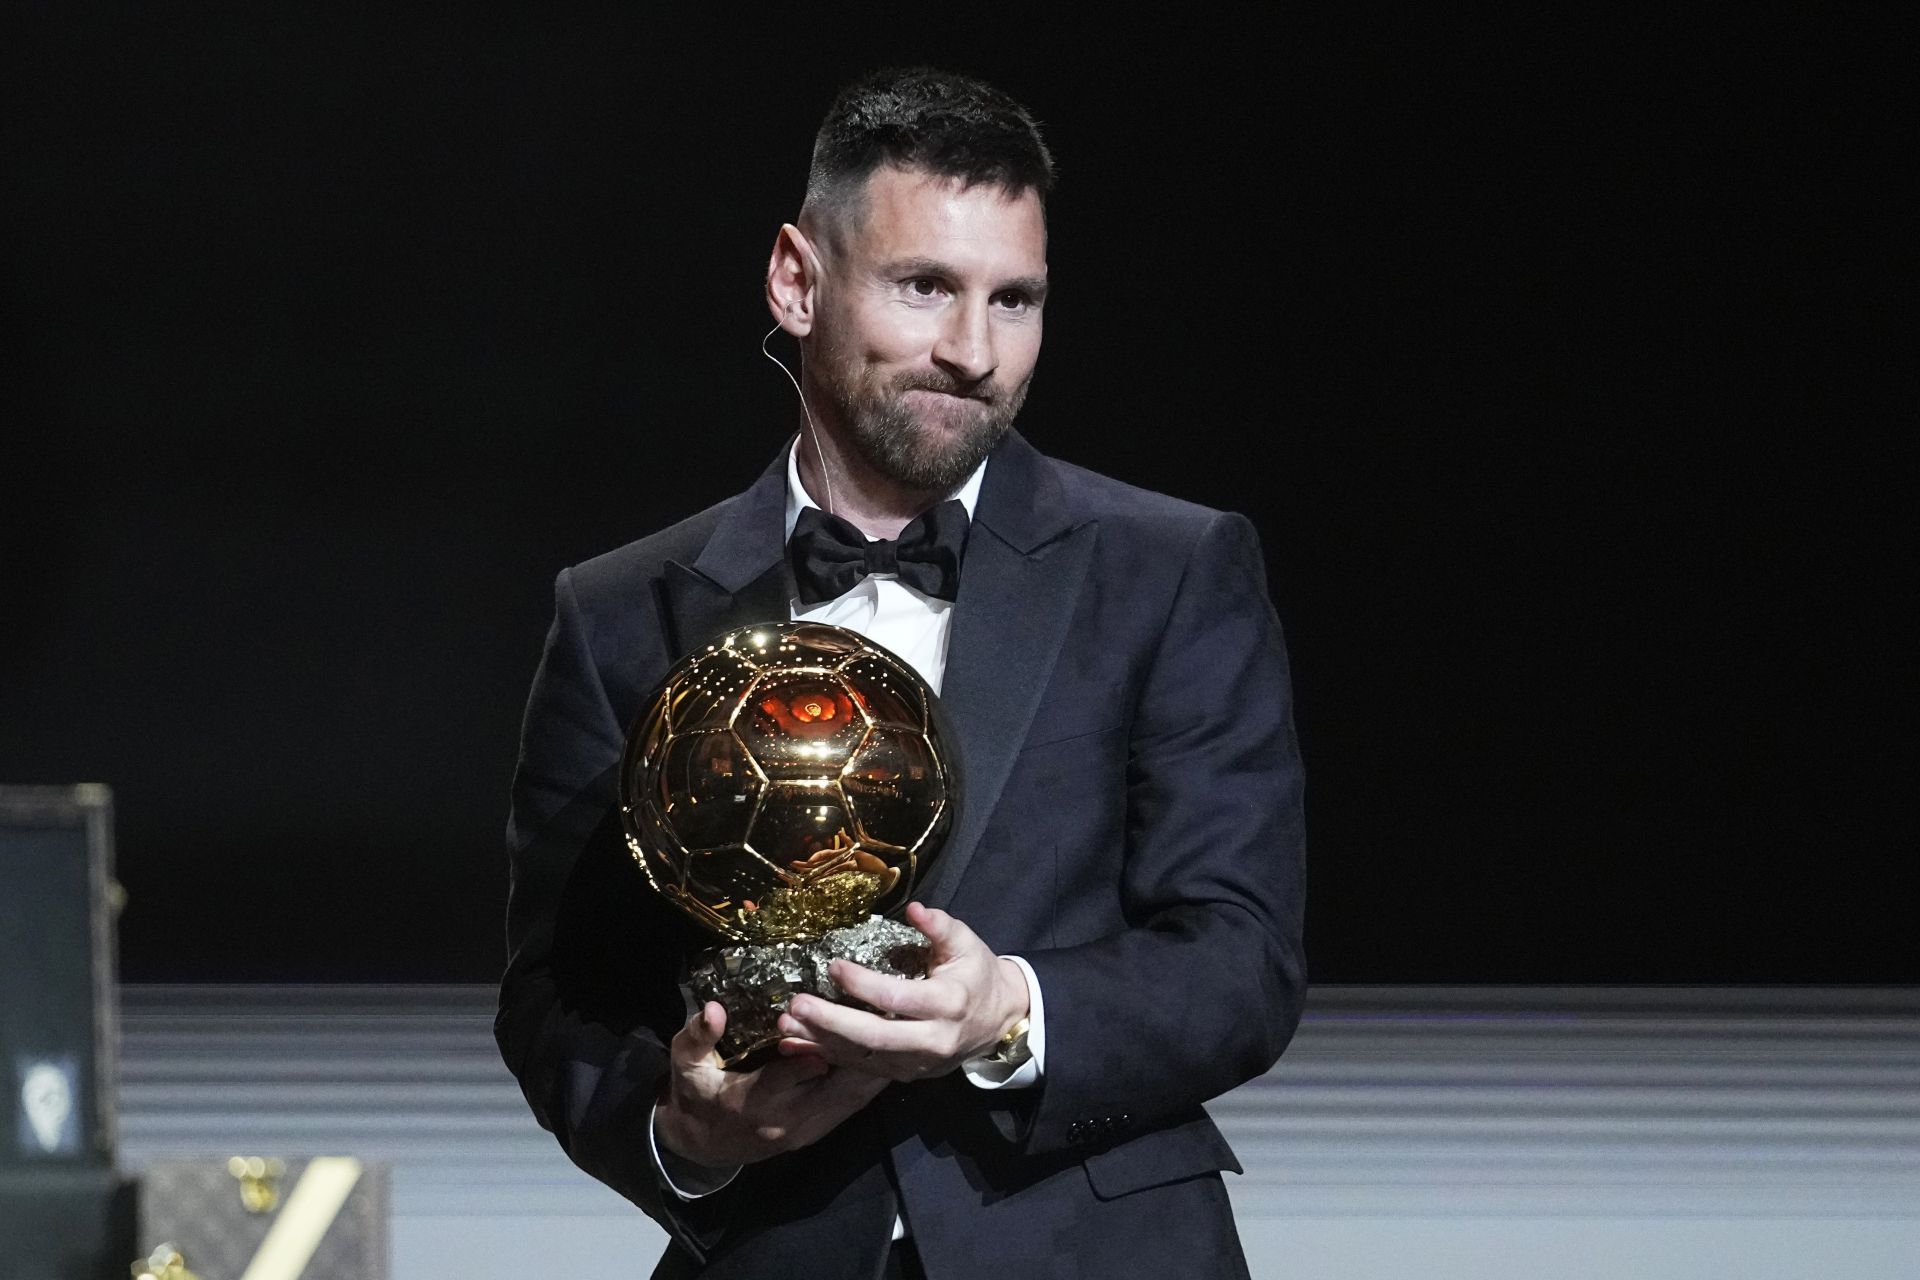 Lionel Messi thanked his teammates for his success.